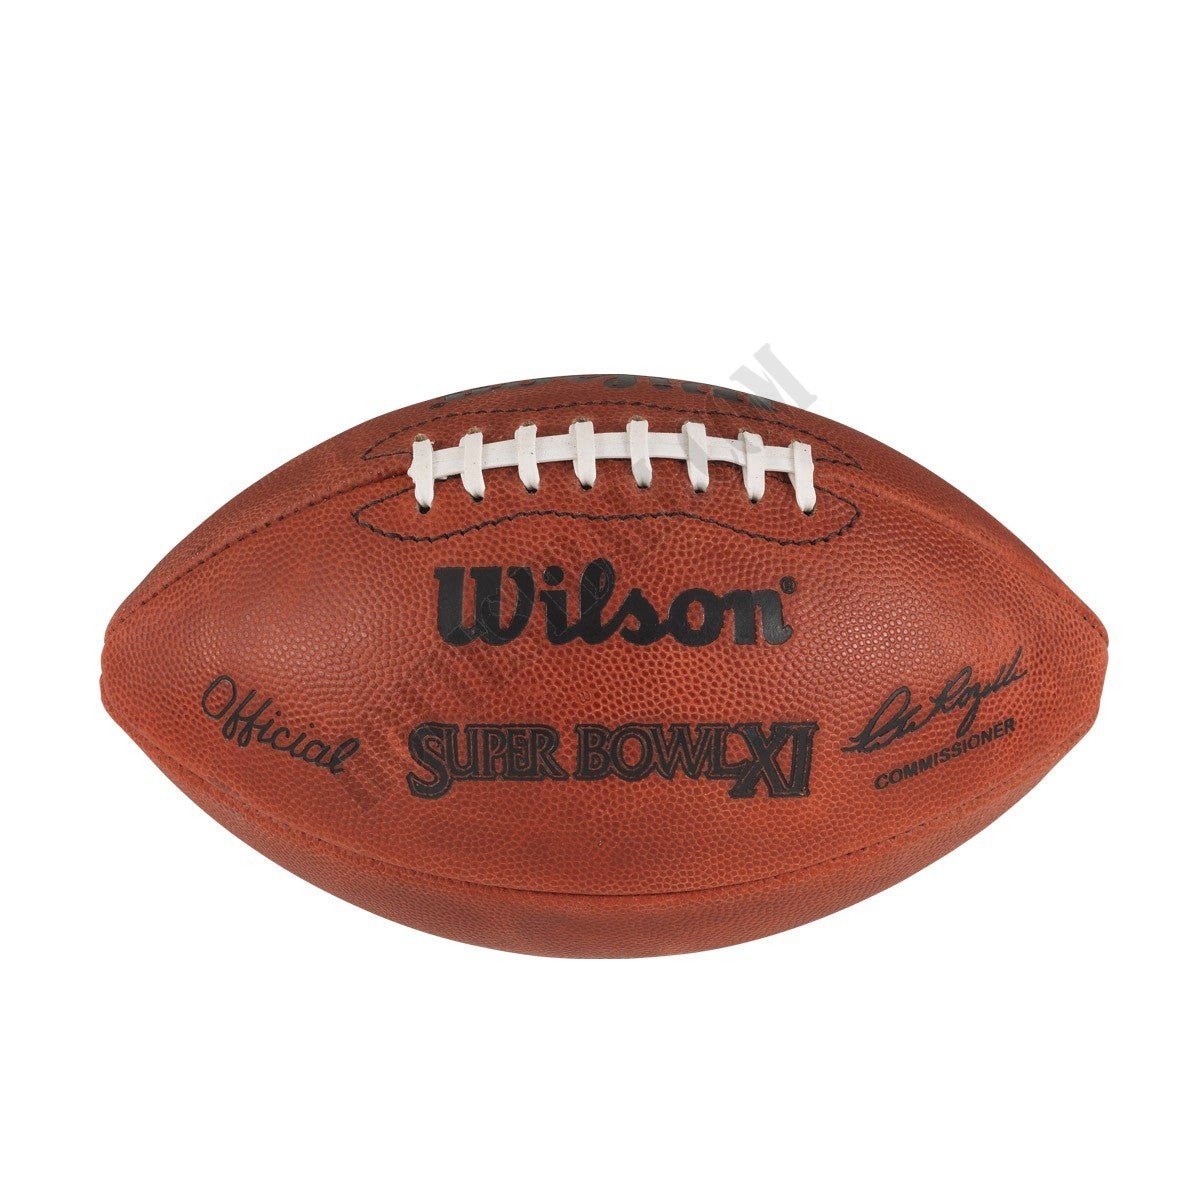 Super Bowl XI Game Football - Oakland Raiders ● Wilson Promotions - -0